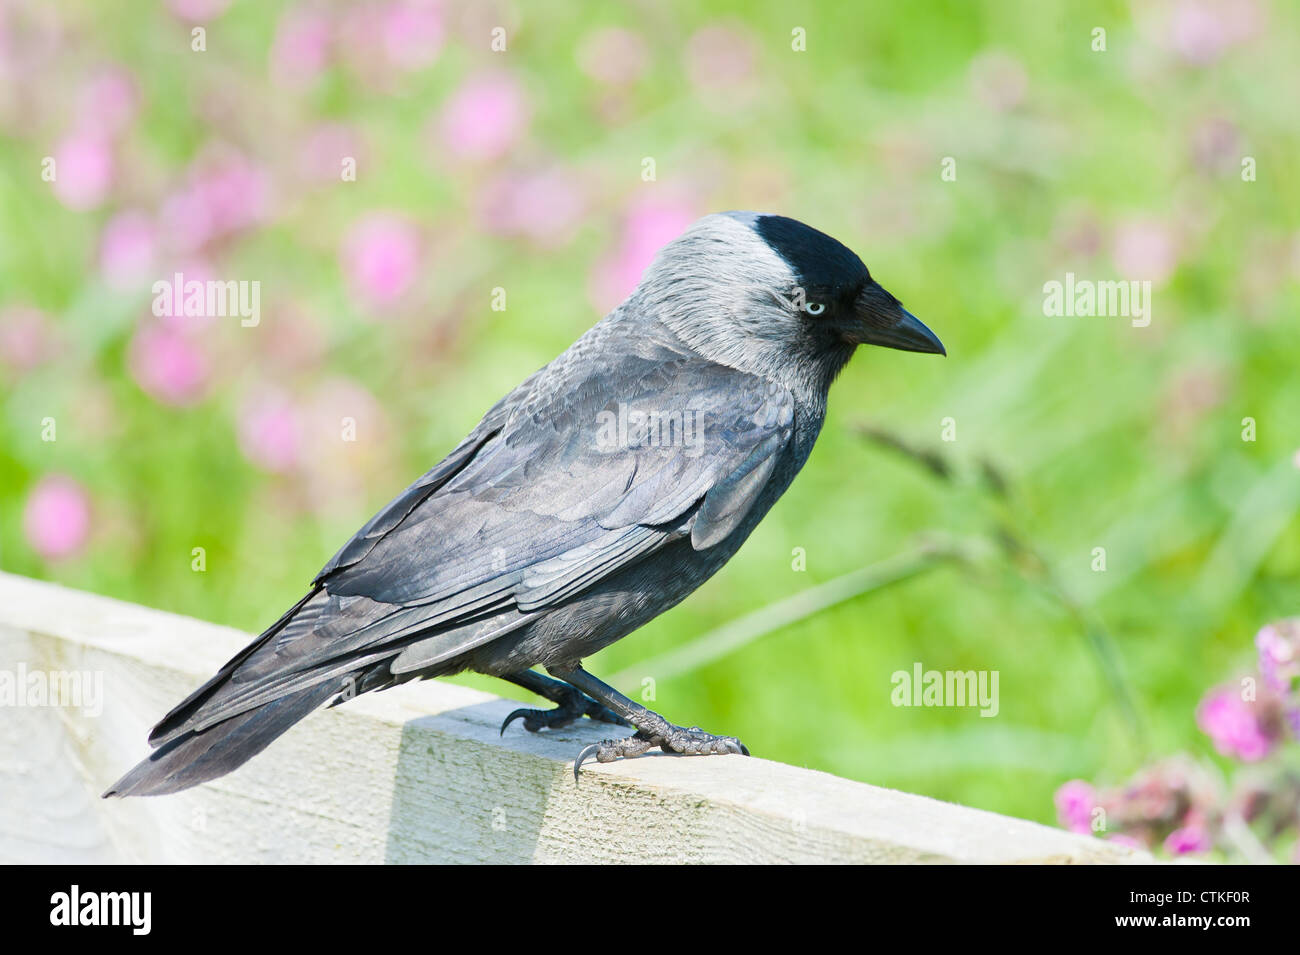 A jackdaw (Corvus monedula) corvid bird perched on a wooden fence with defocused pink campion in the background. Stock Photo